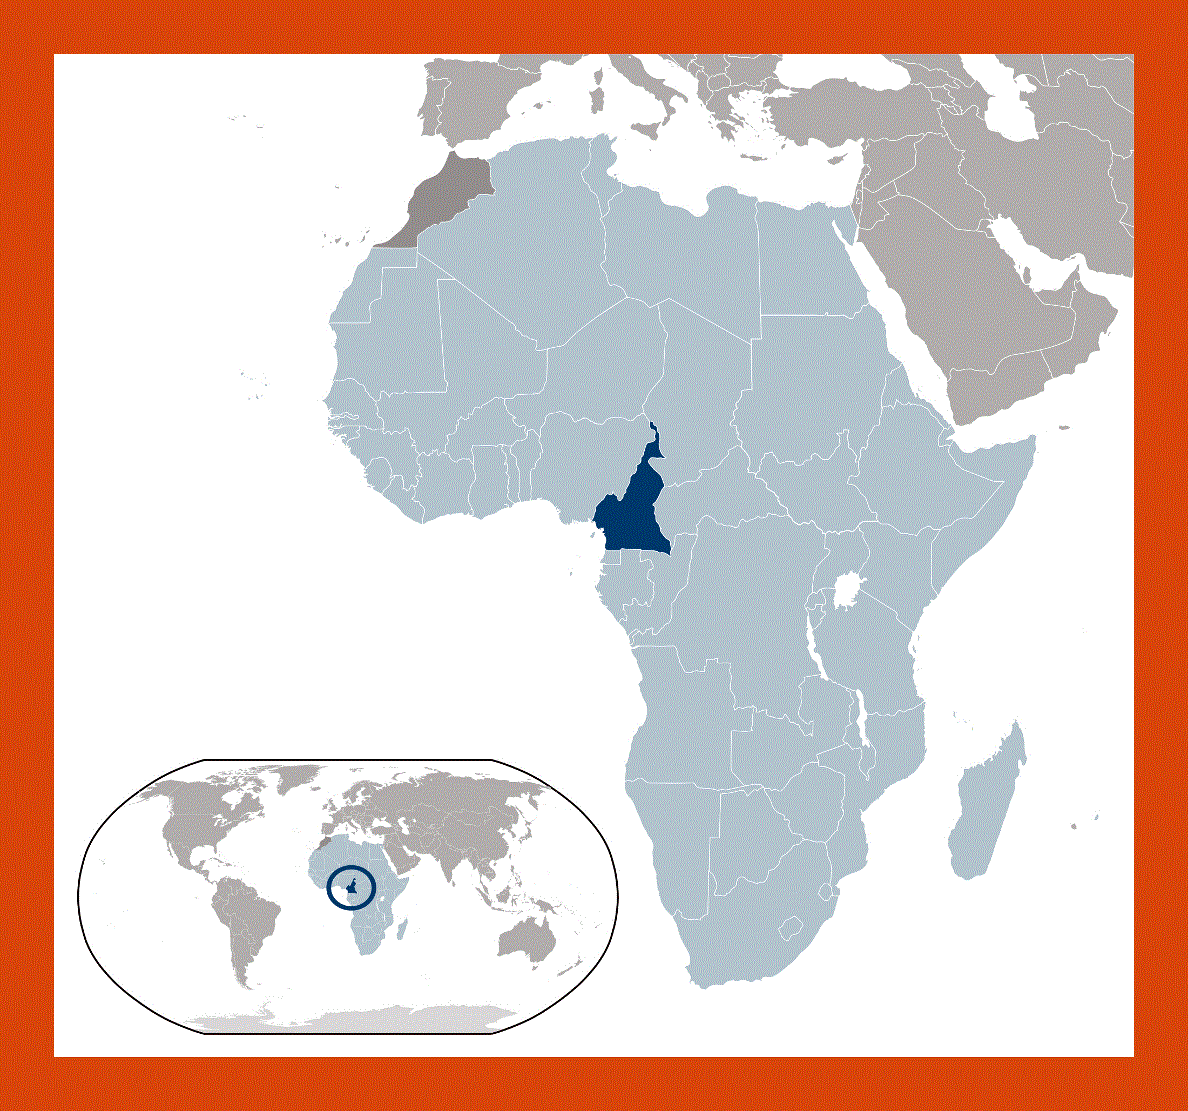 Location map of Cameroon